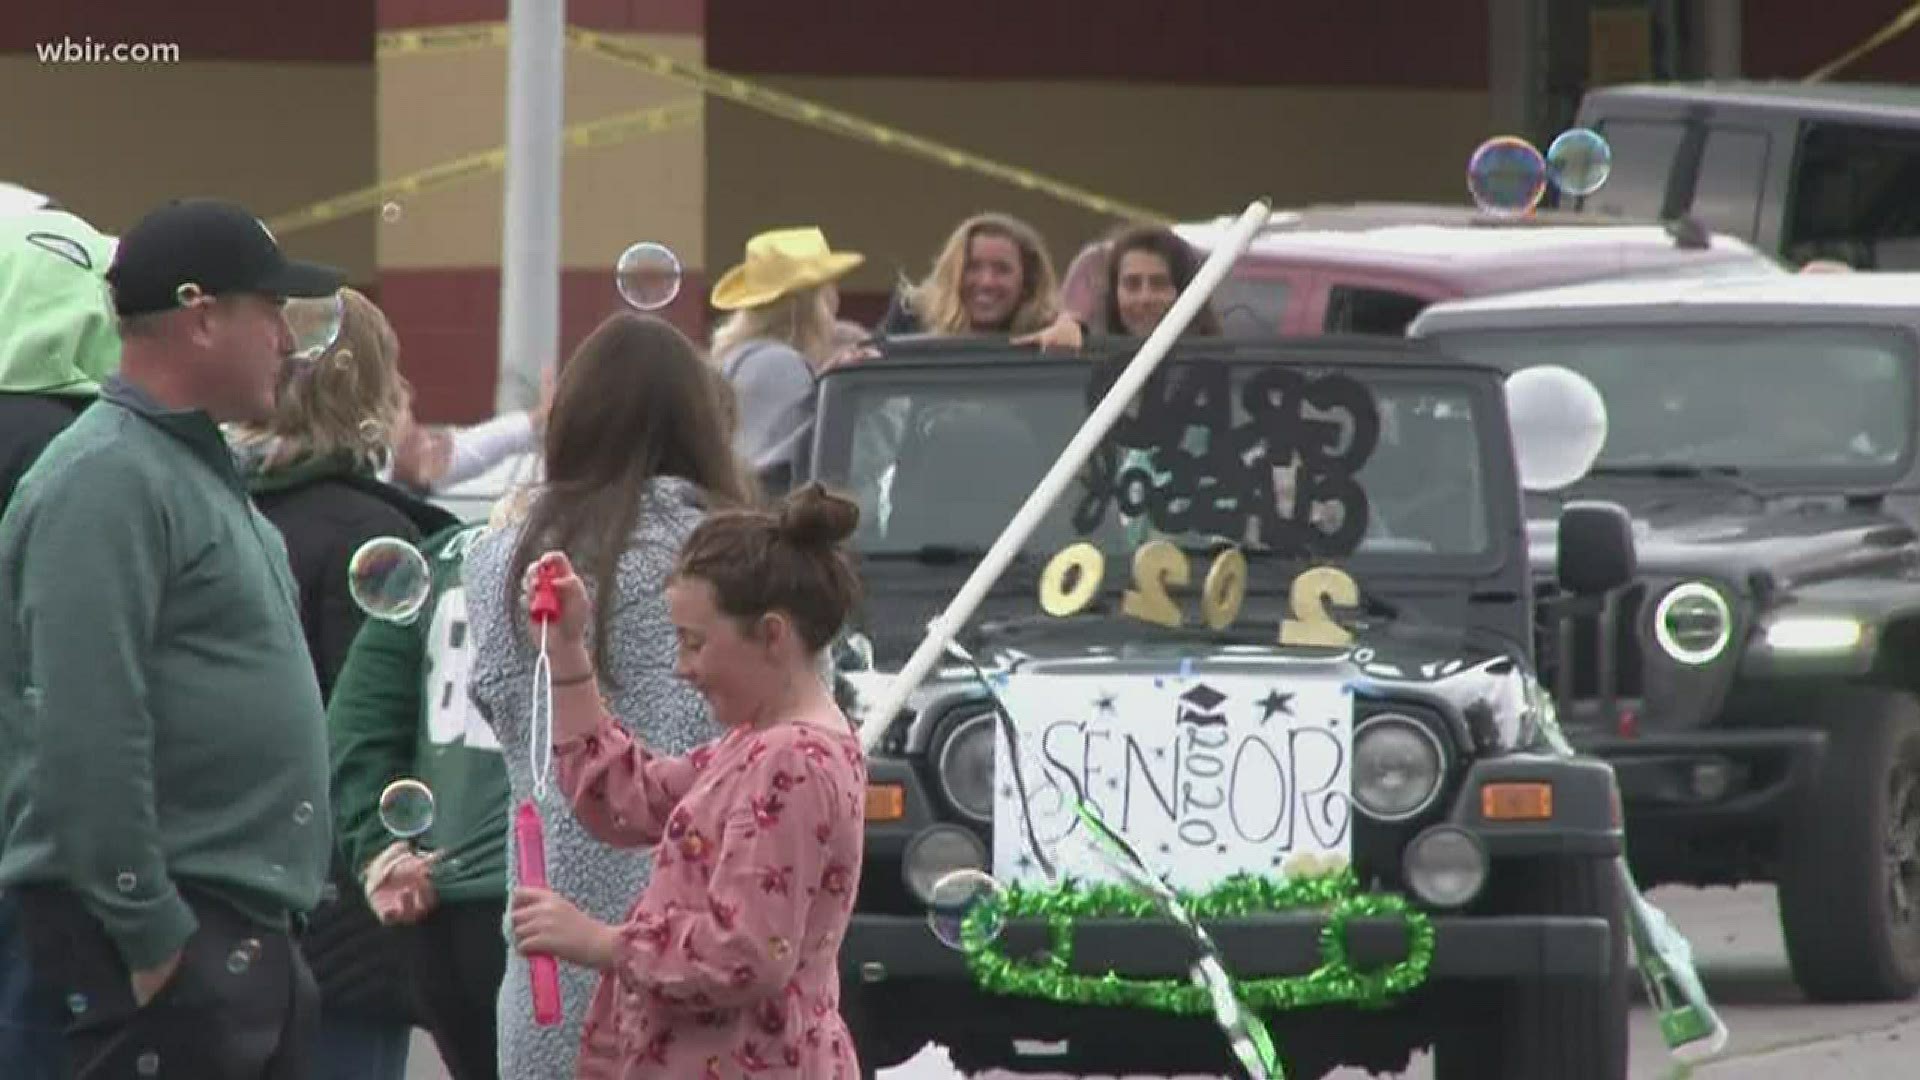 Knoxville Catholic High School honored its class of 2020 tonight with a big parade through campus.